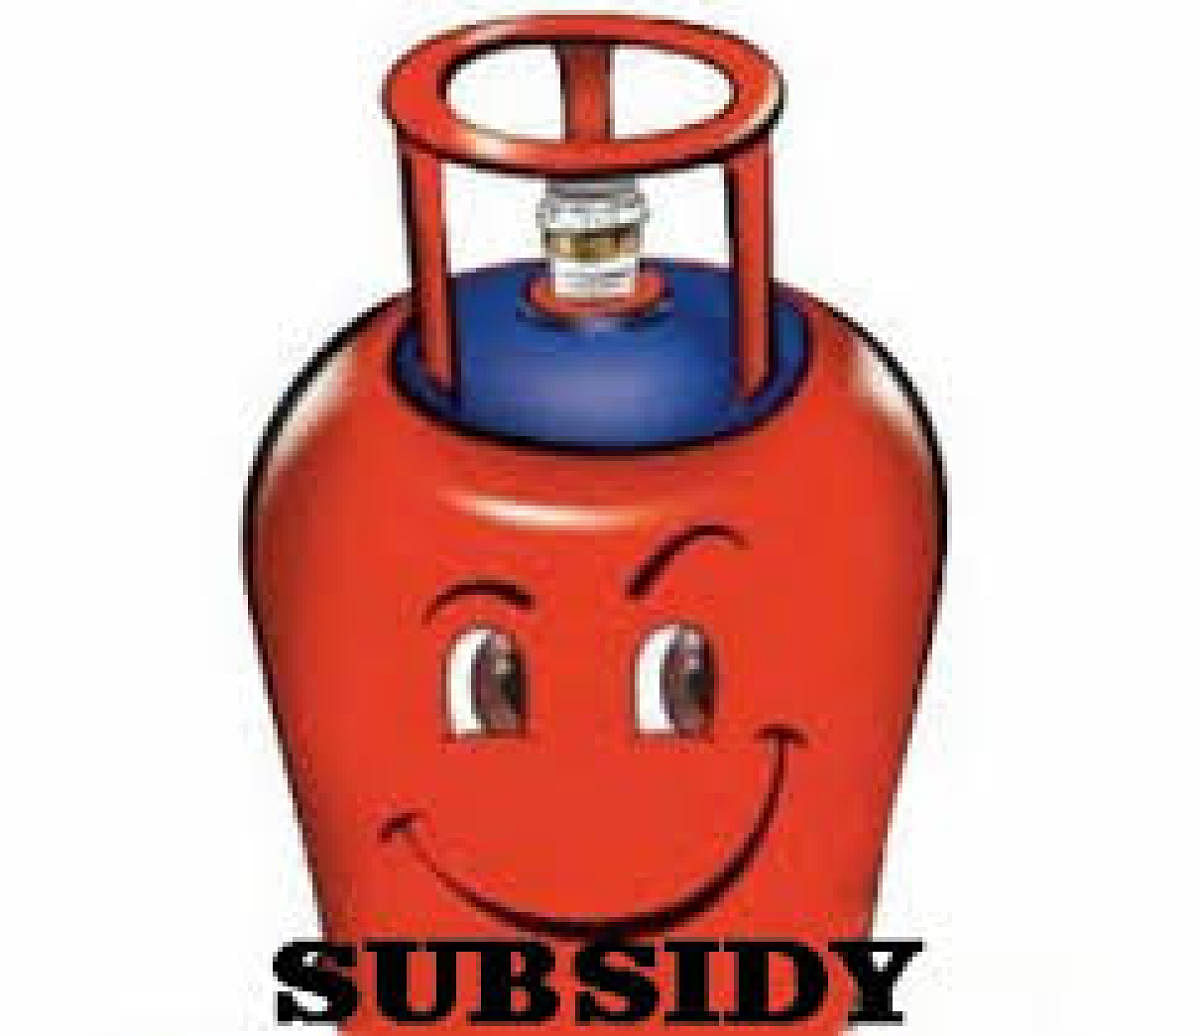 The government is planning to revert to the old system of giving cooking gas (LPG) cylinders to households on subsidised rates like pre-2013-14 when subsidy to bank accounts was not in practice.